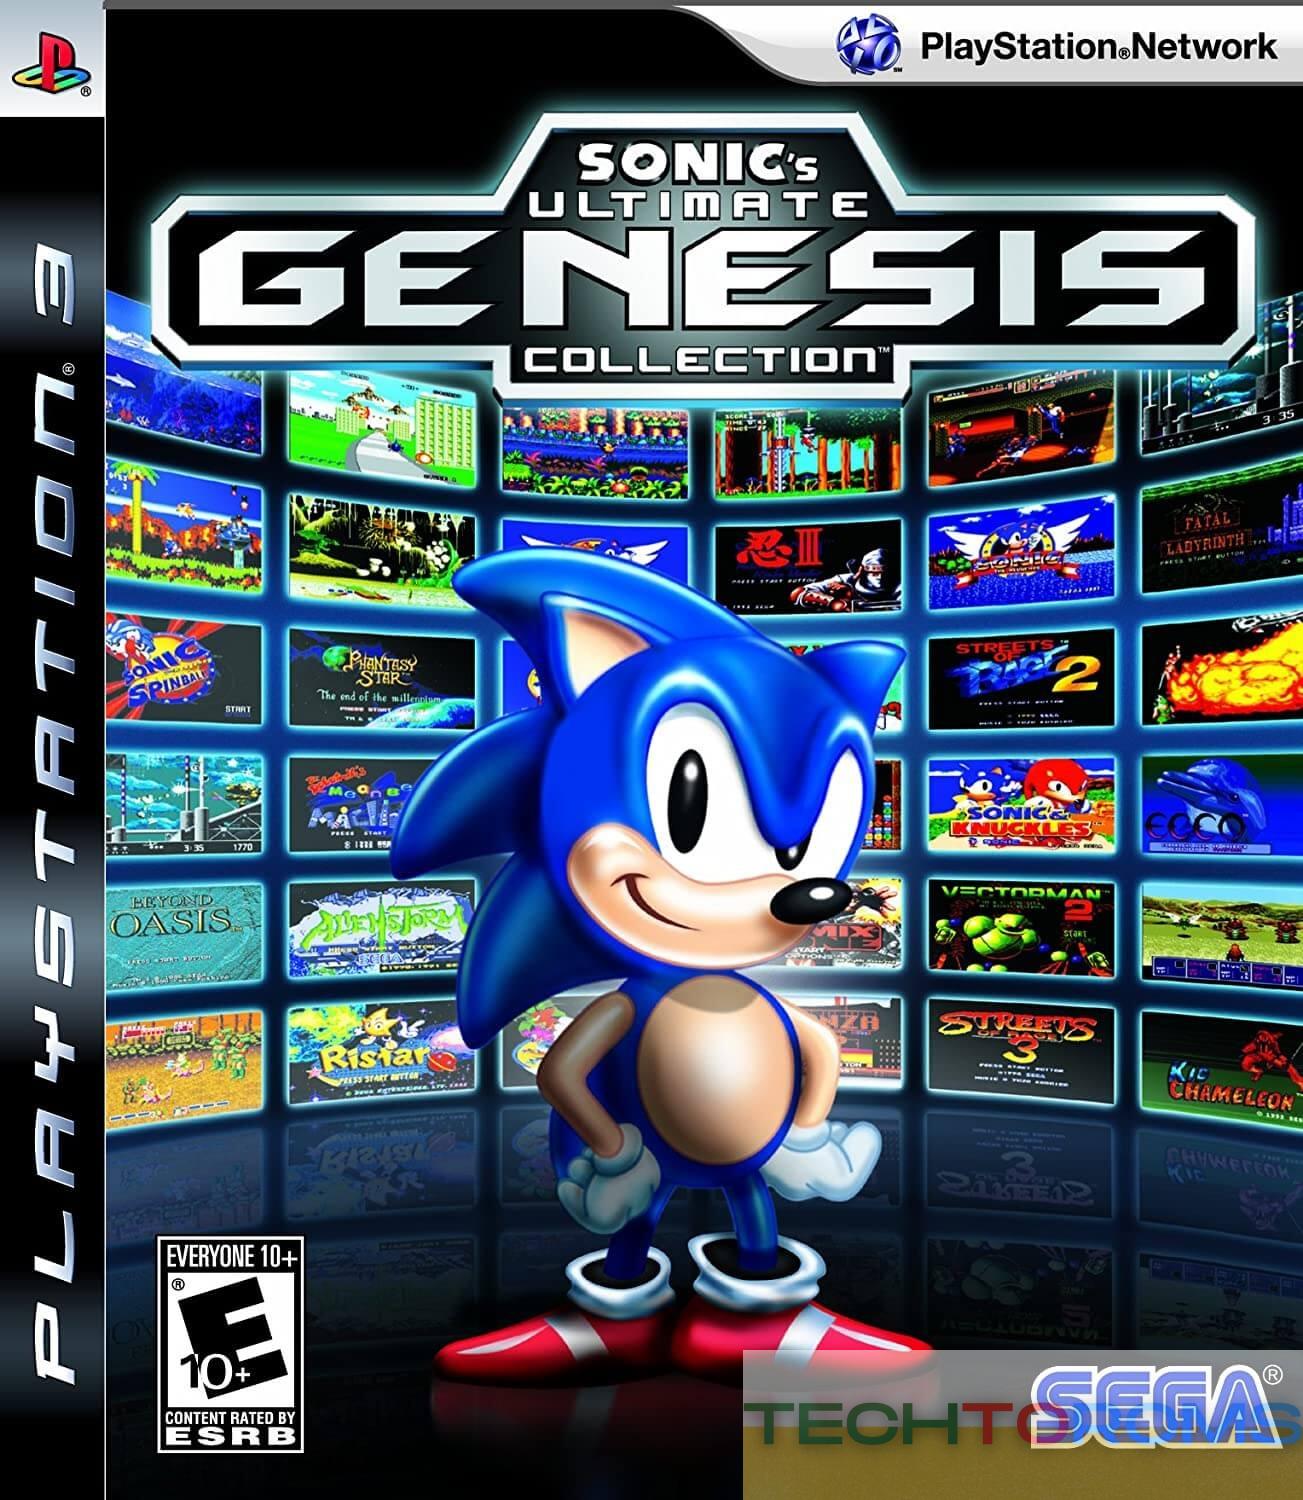 Sonic’s Ultimate Genesis Collection